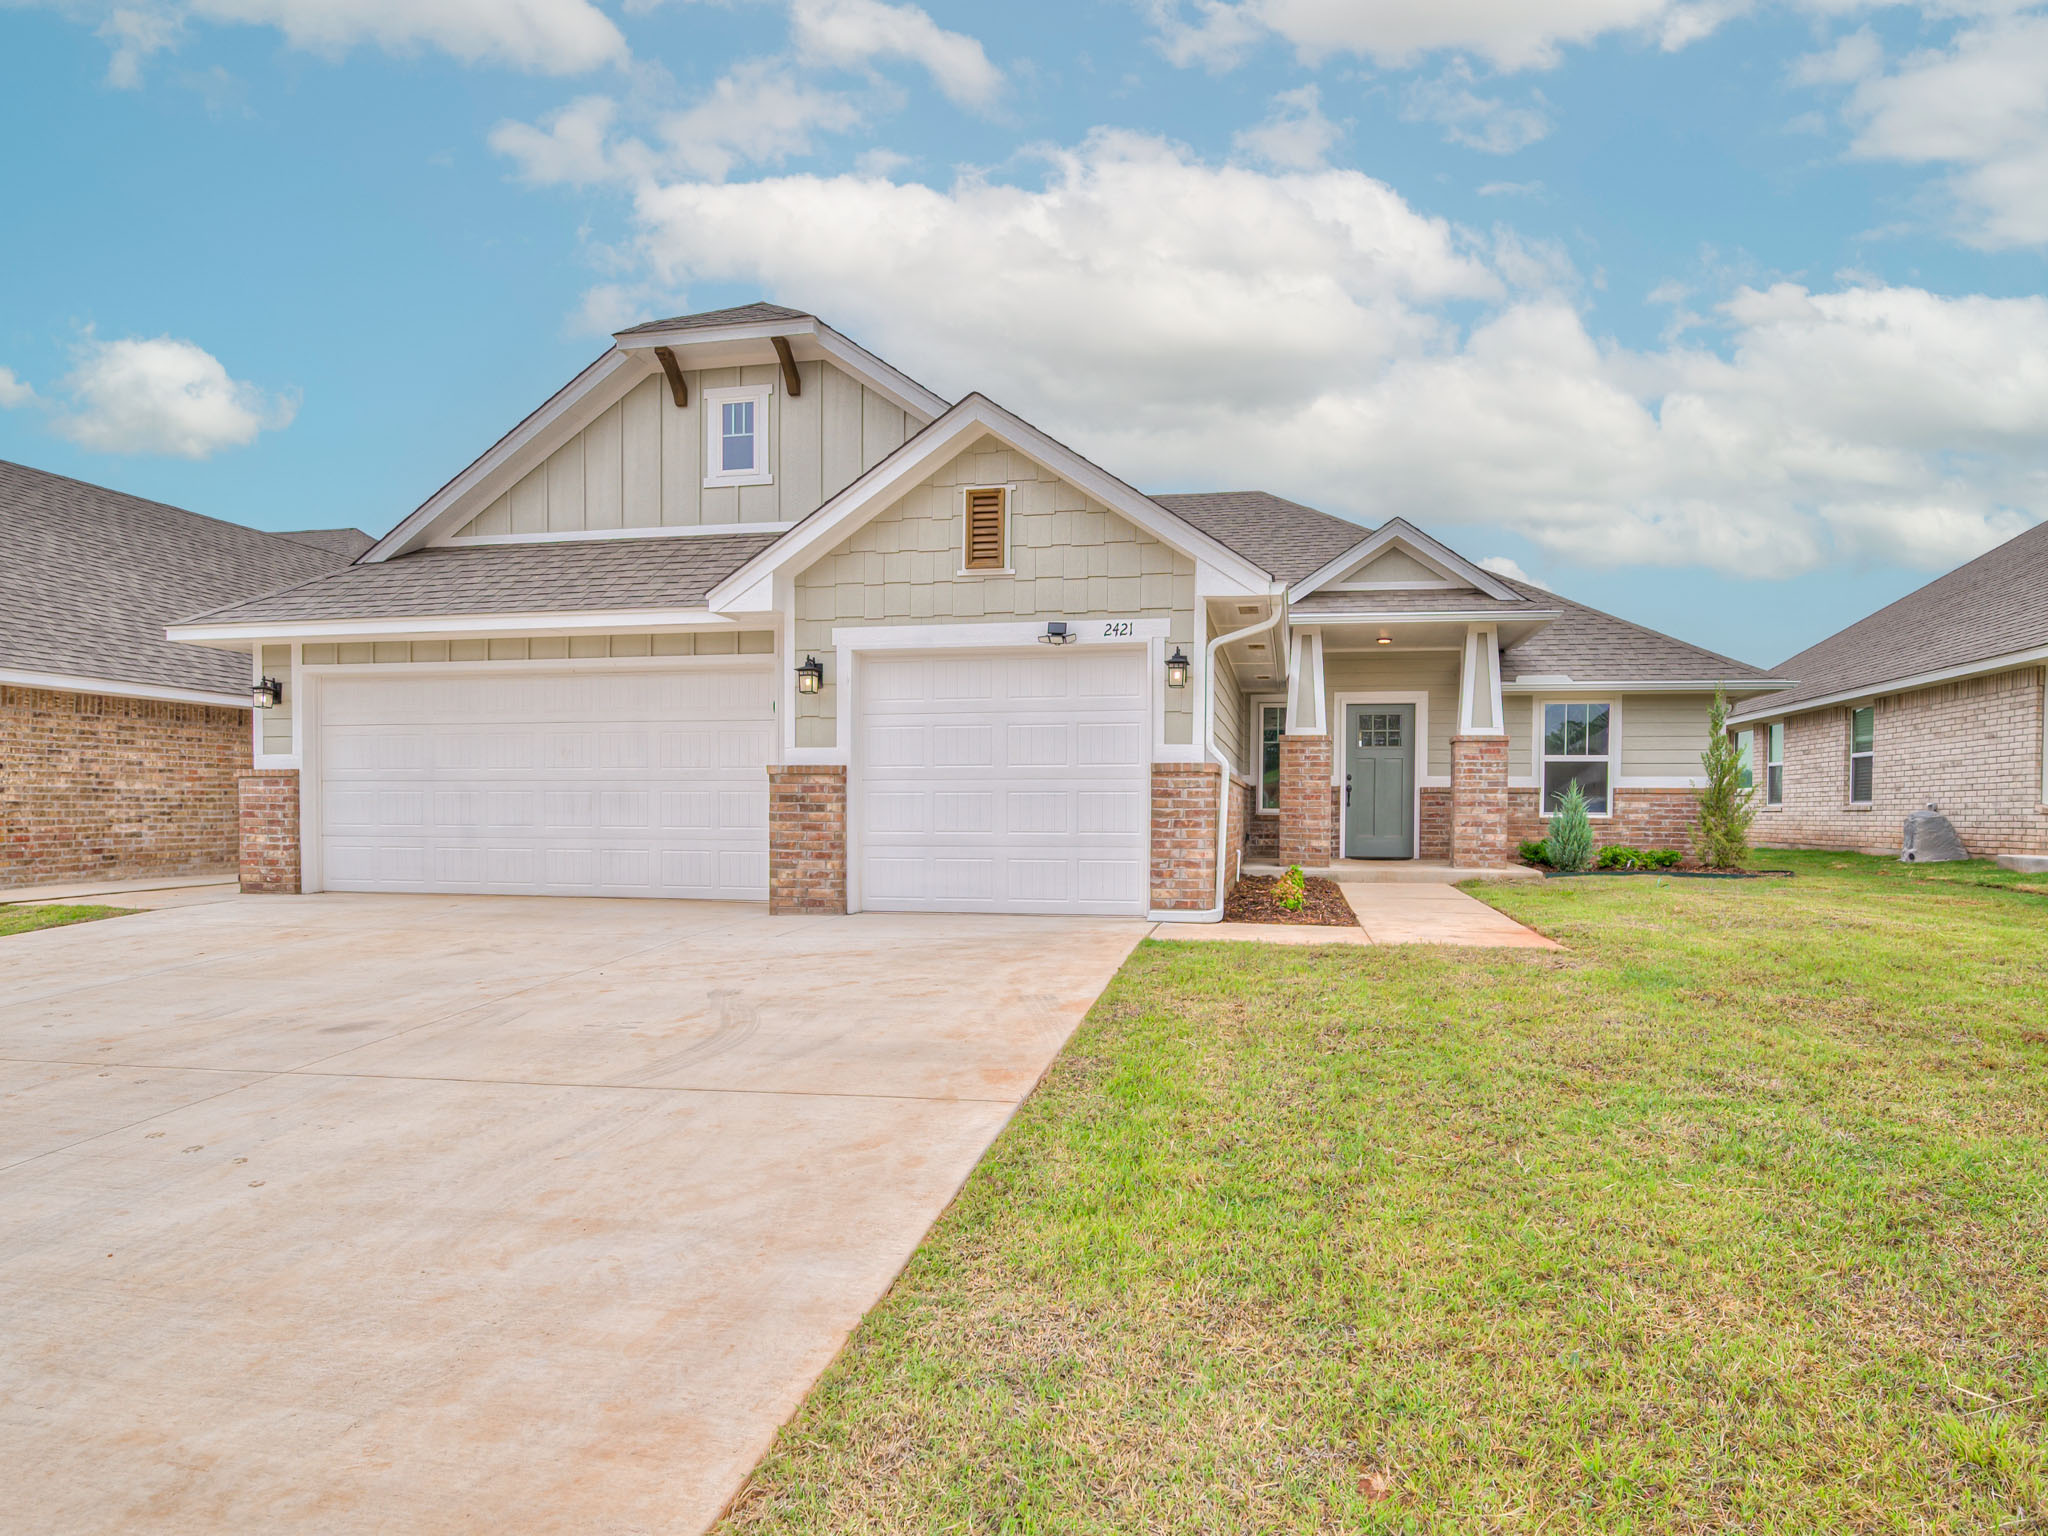 2421 Creekview Trail, Moore, Oklahoma 73160, 4 Bedrooms Bedrooms, ,2 BathroomsBathrooms,House,For Sale,Creekview Trail,1460